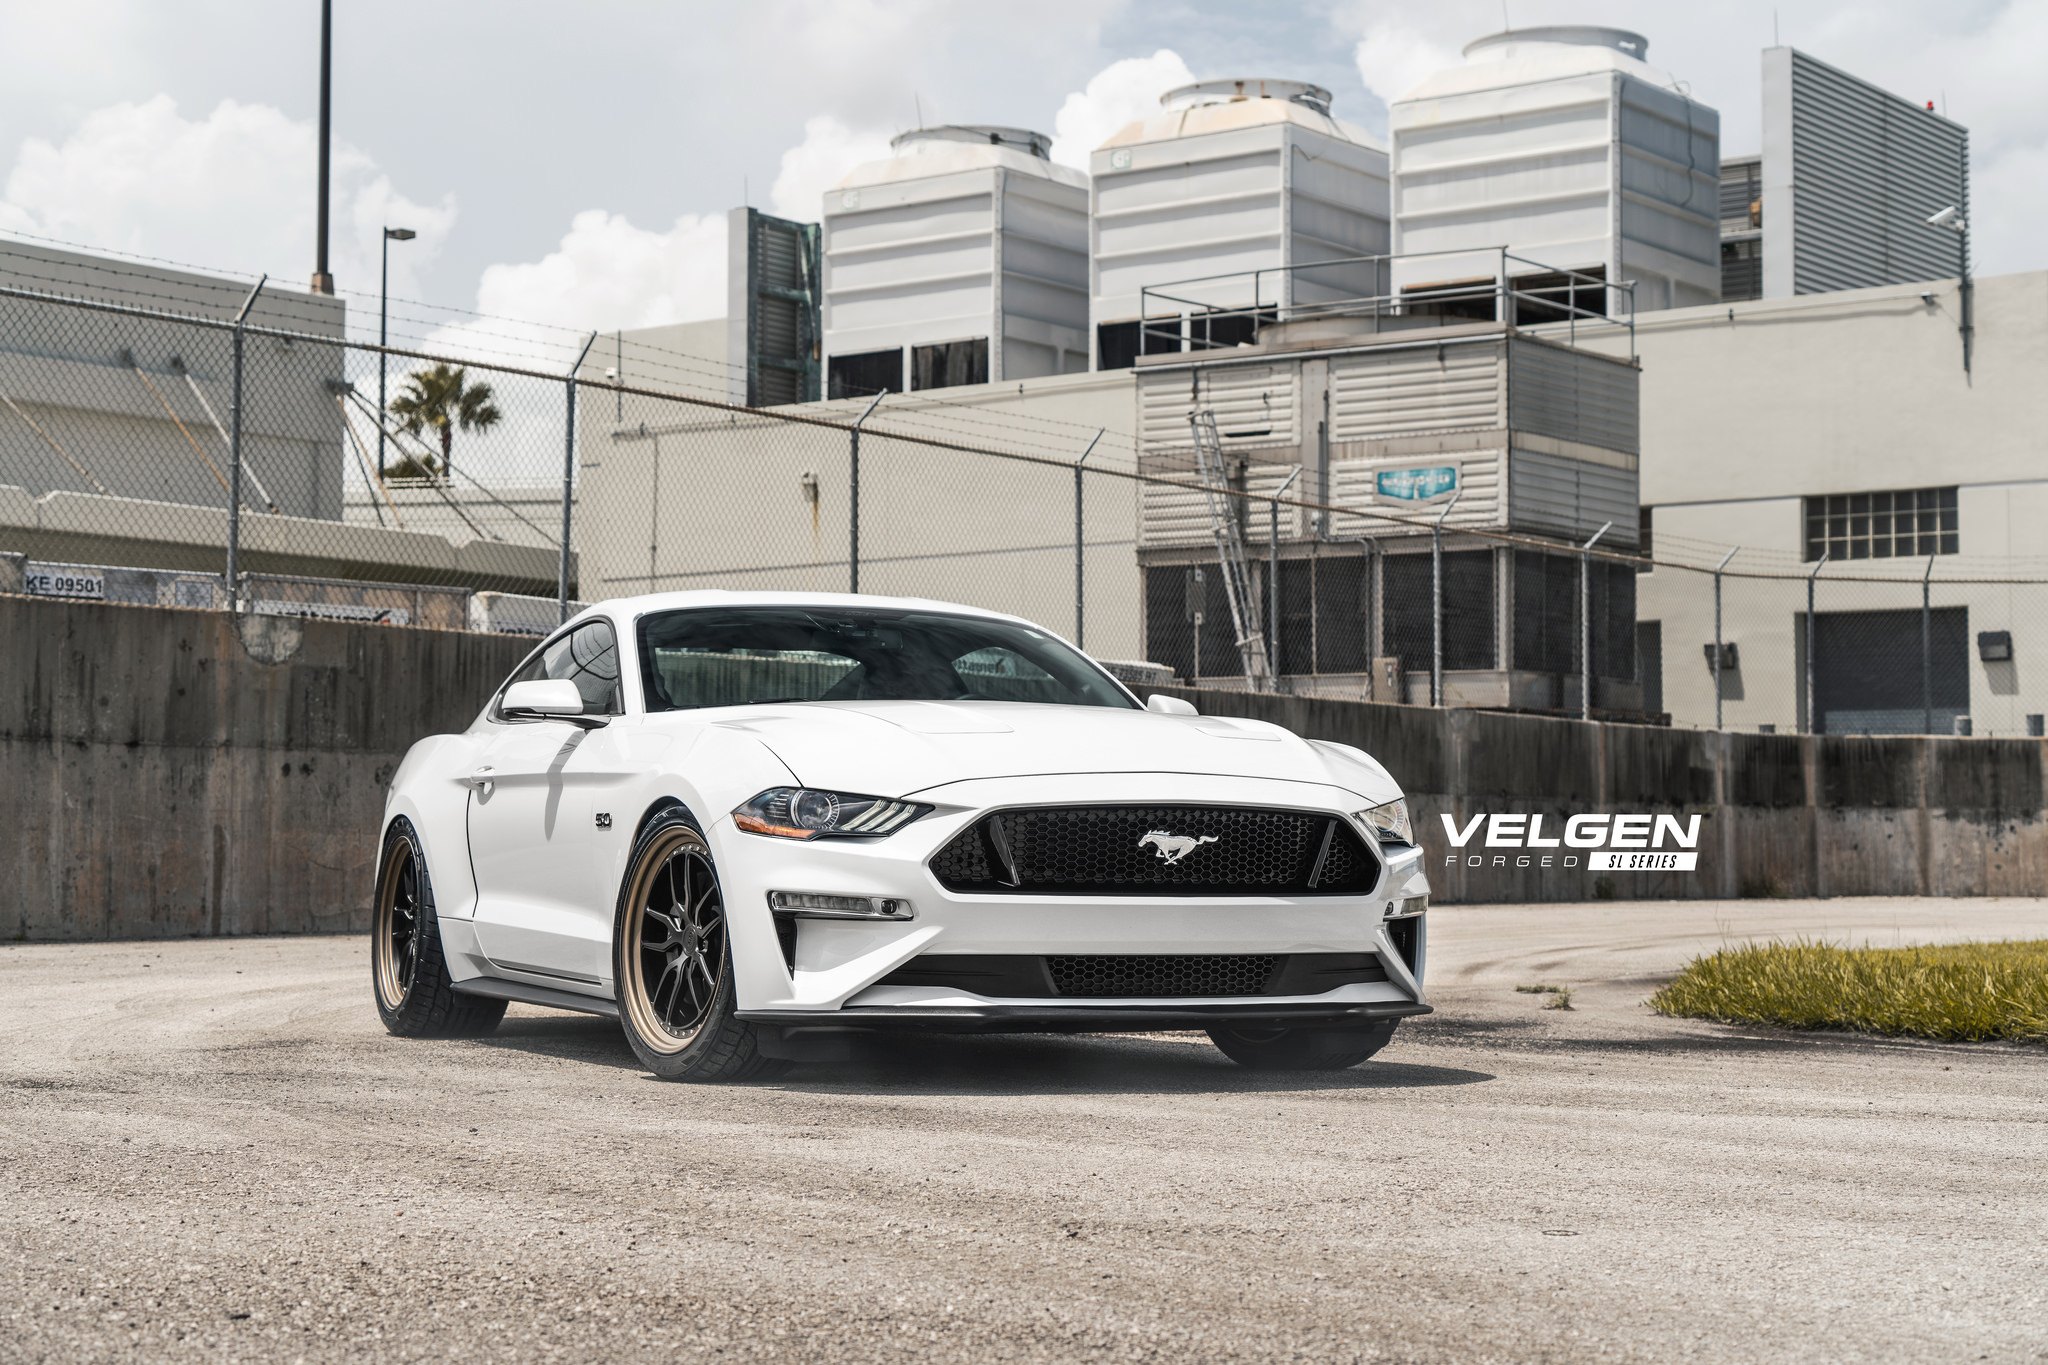 Aftermarket Front Bumper on White Ford Mustang 5.0 - Photo by Velgen Wheels